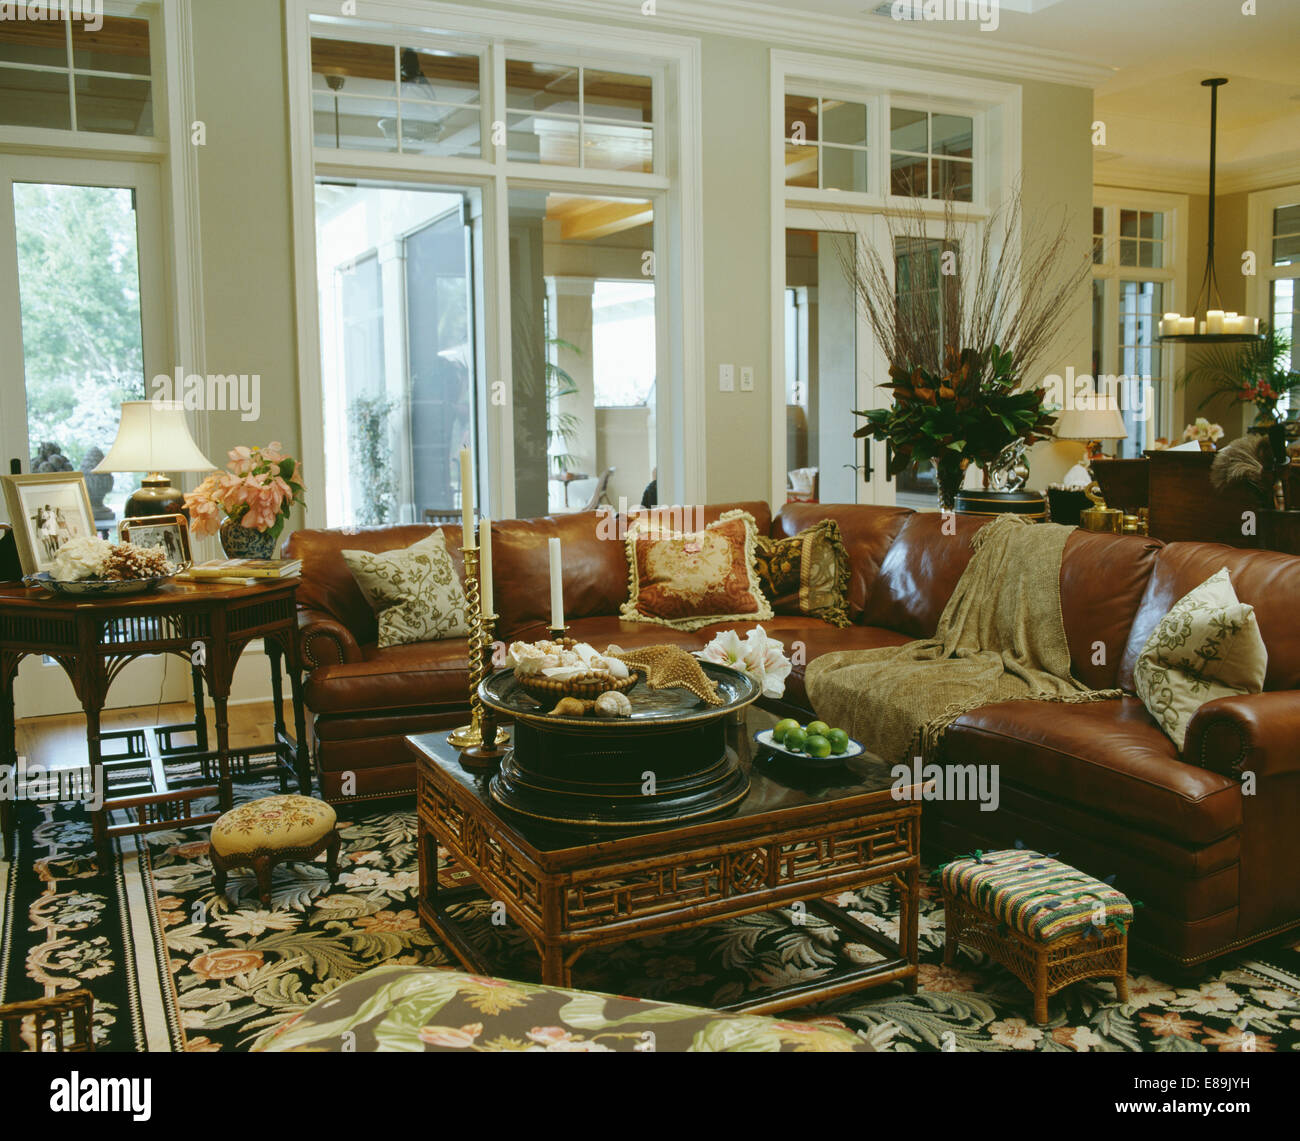 Oriental-style coffee table in front of large brown leather corner sofa in traditional living room with patterned carpet Stock Photo